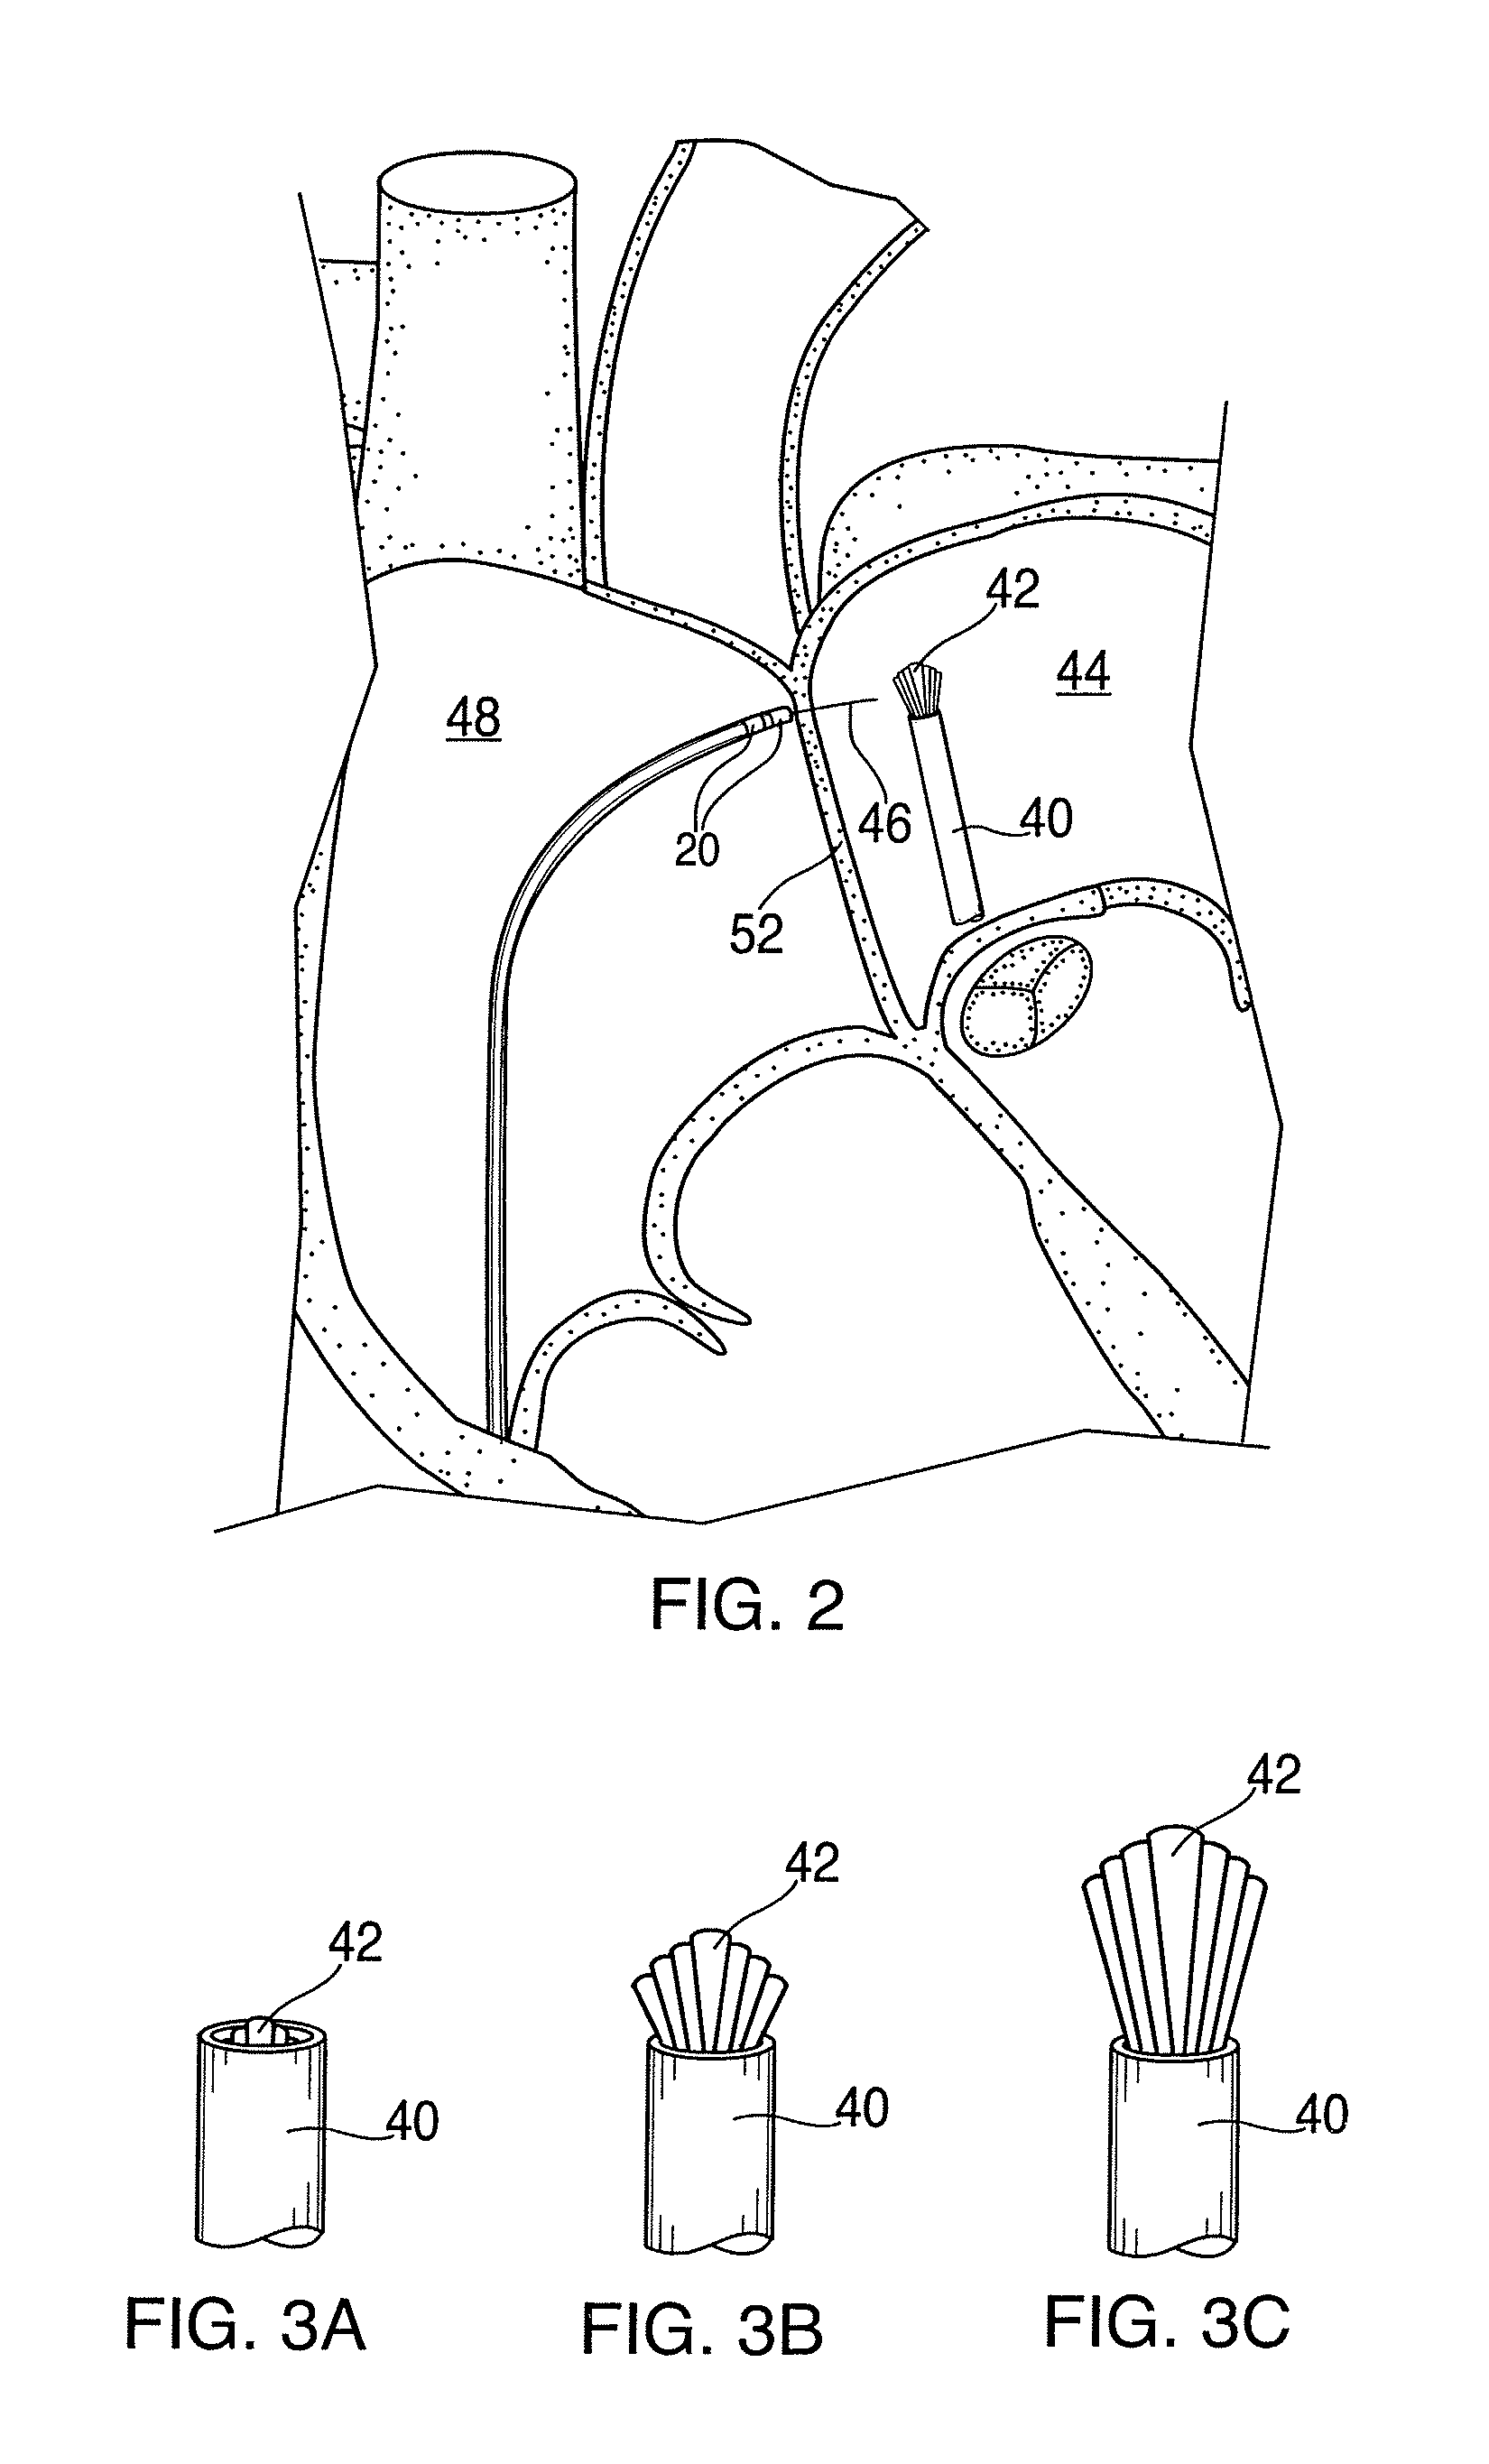 Apparatus for safe performance of transseptal technique and placement and positioning of an ablation catheter